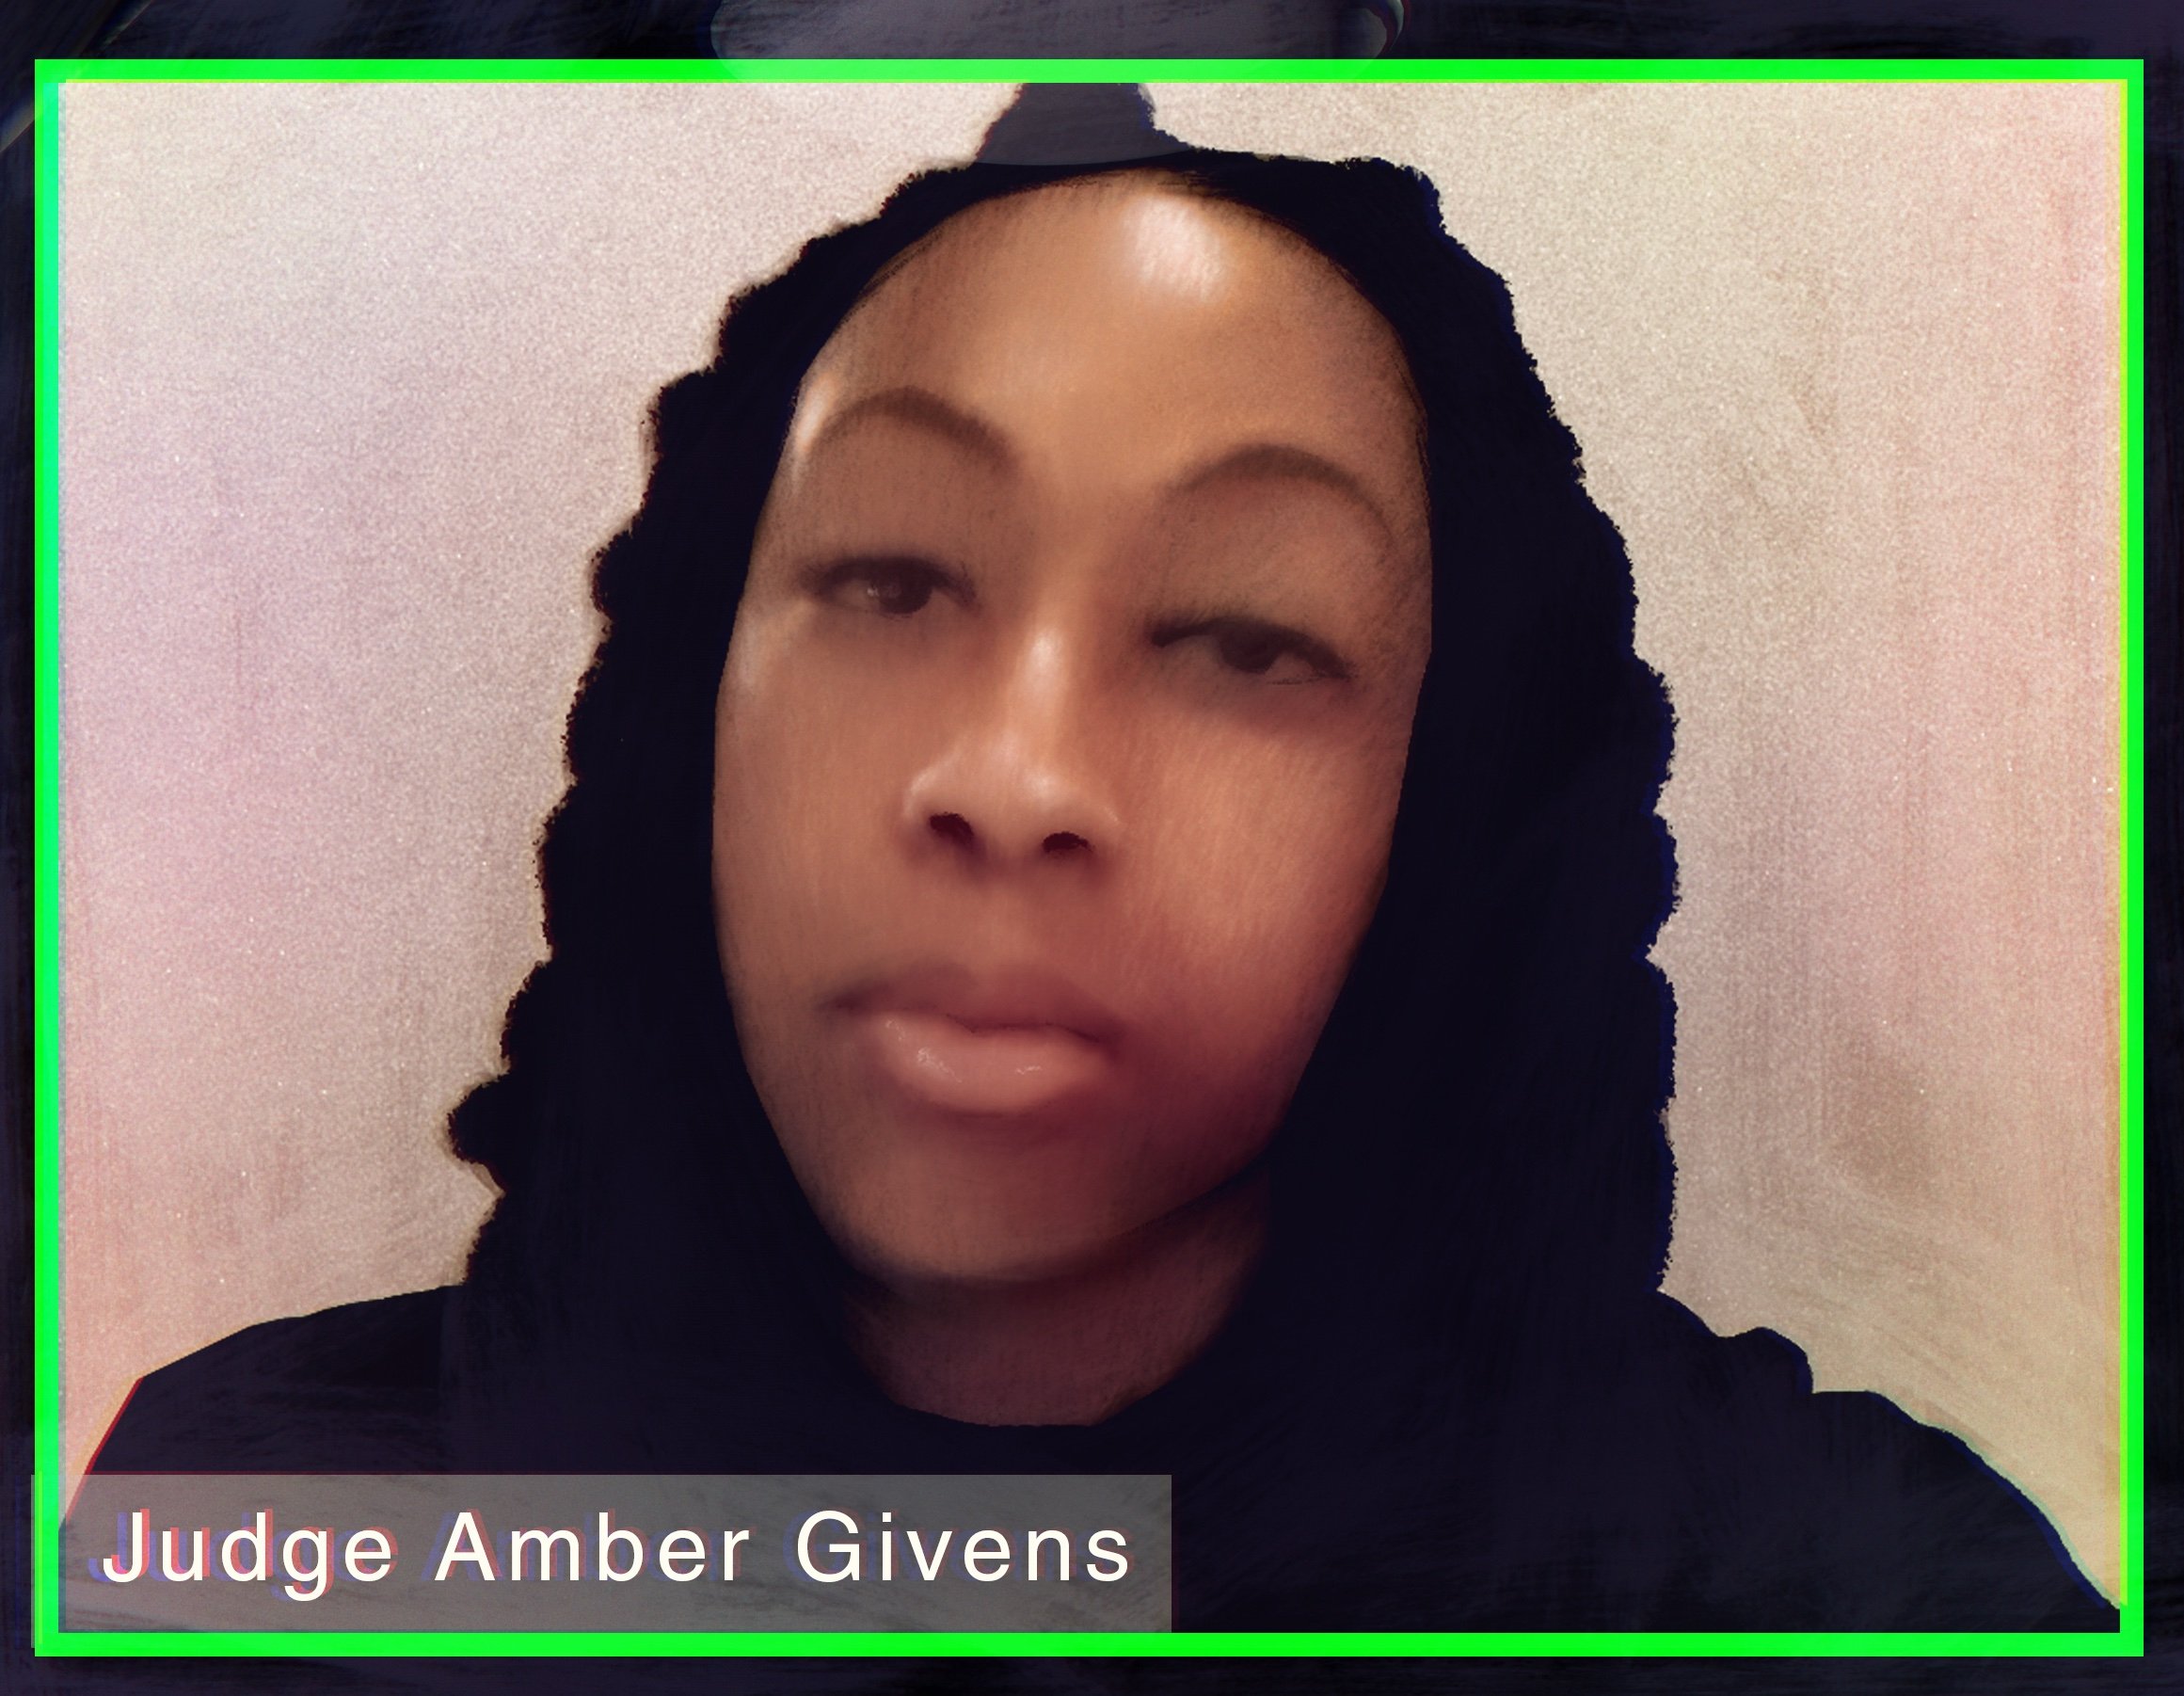 Judge Amber Givens on a Zoom call